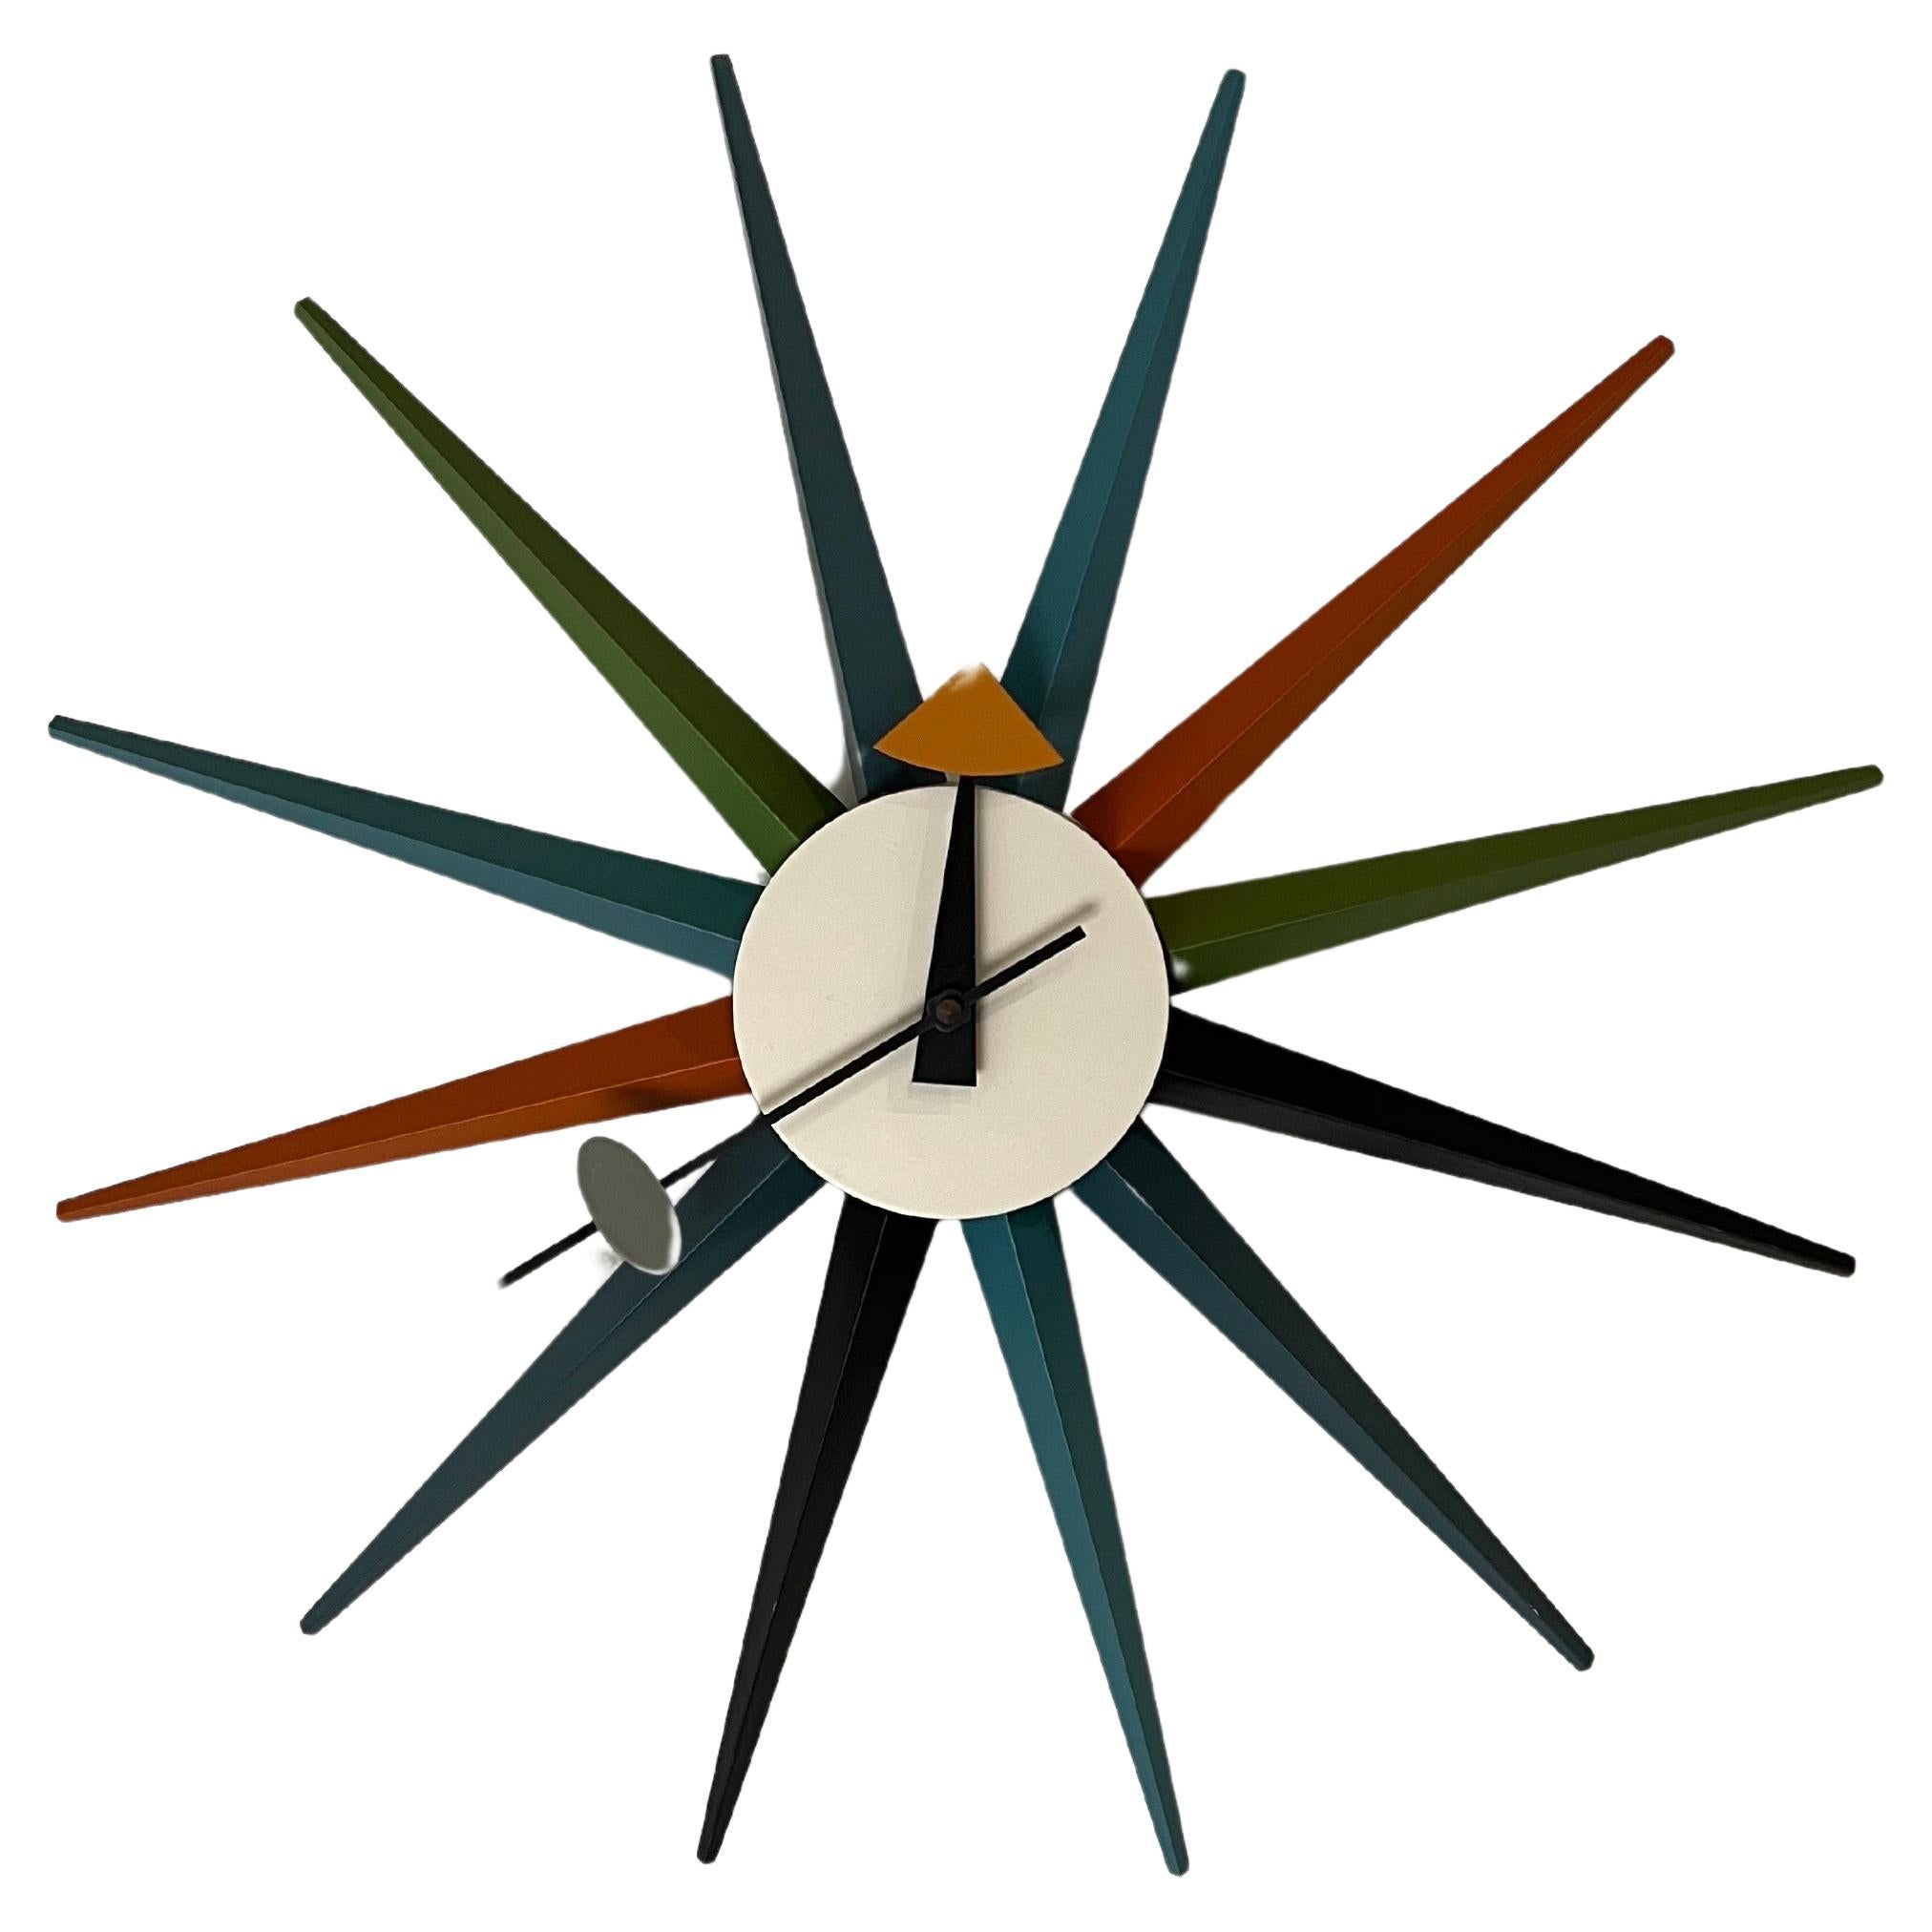 Klassik Mid-Century Modern, Atomic age vintage wall clock designed by George Nelson for Vitra, better-operated mechanism, made in Germany circa 1990s in working condition.